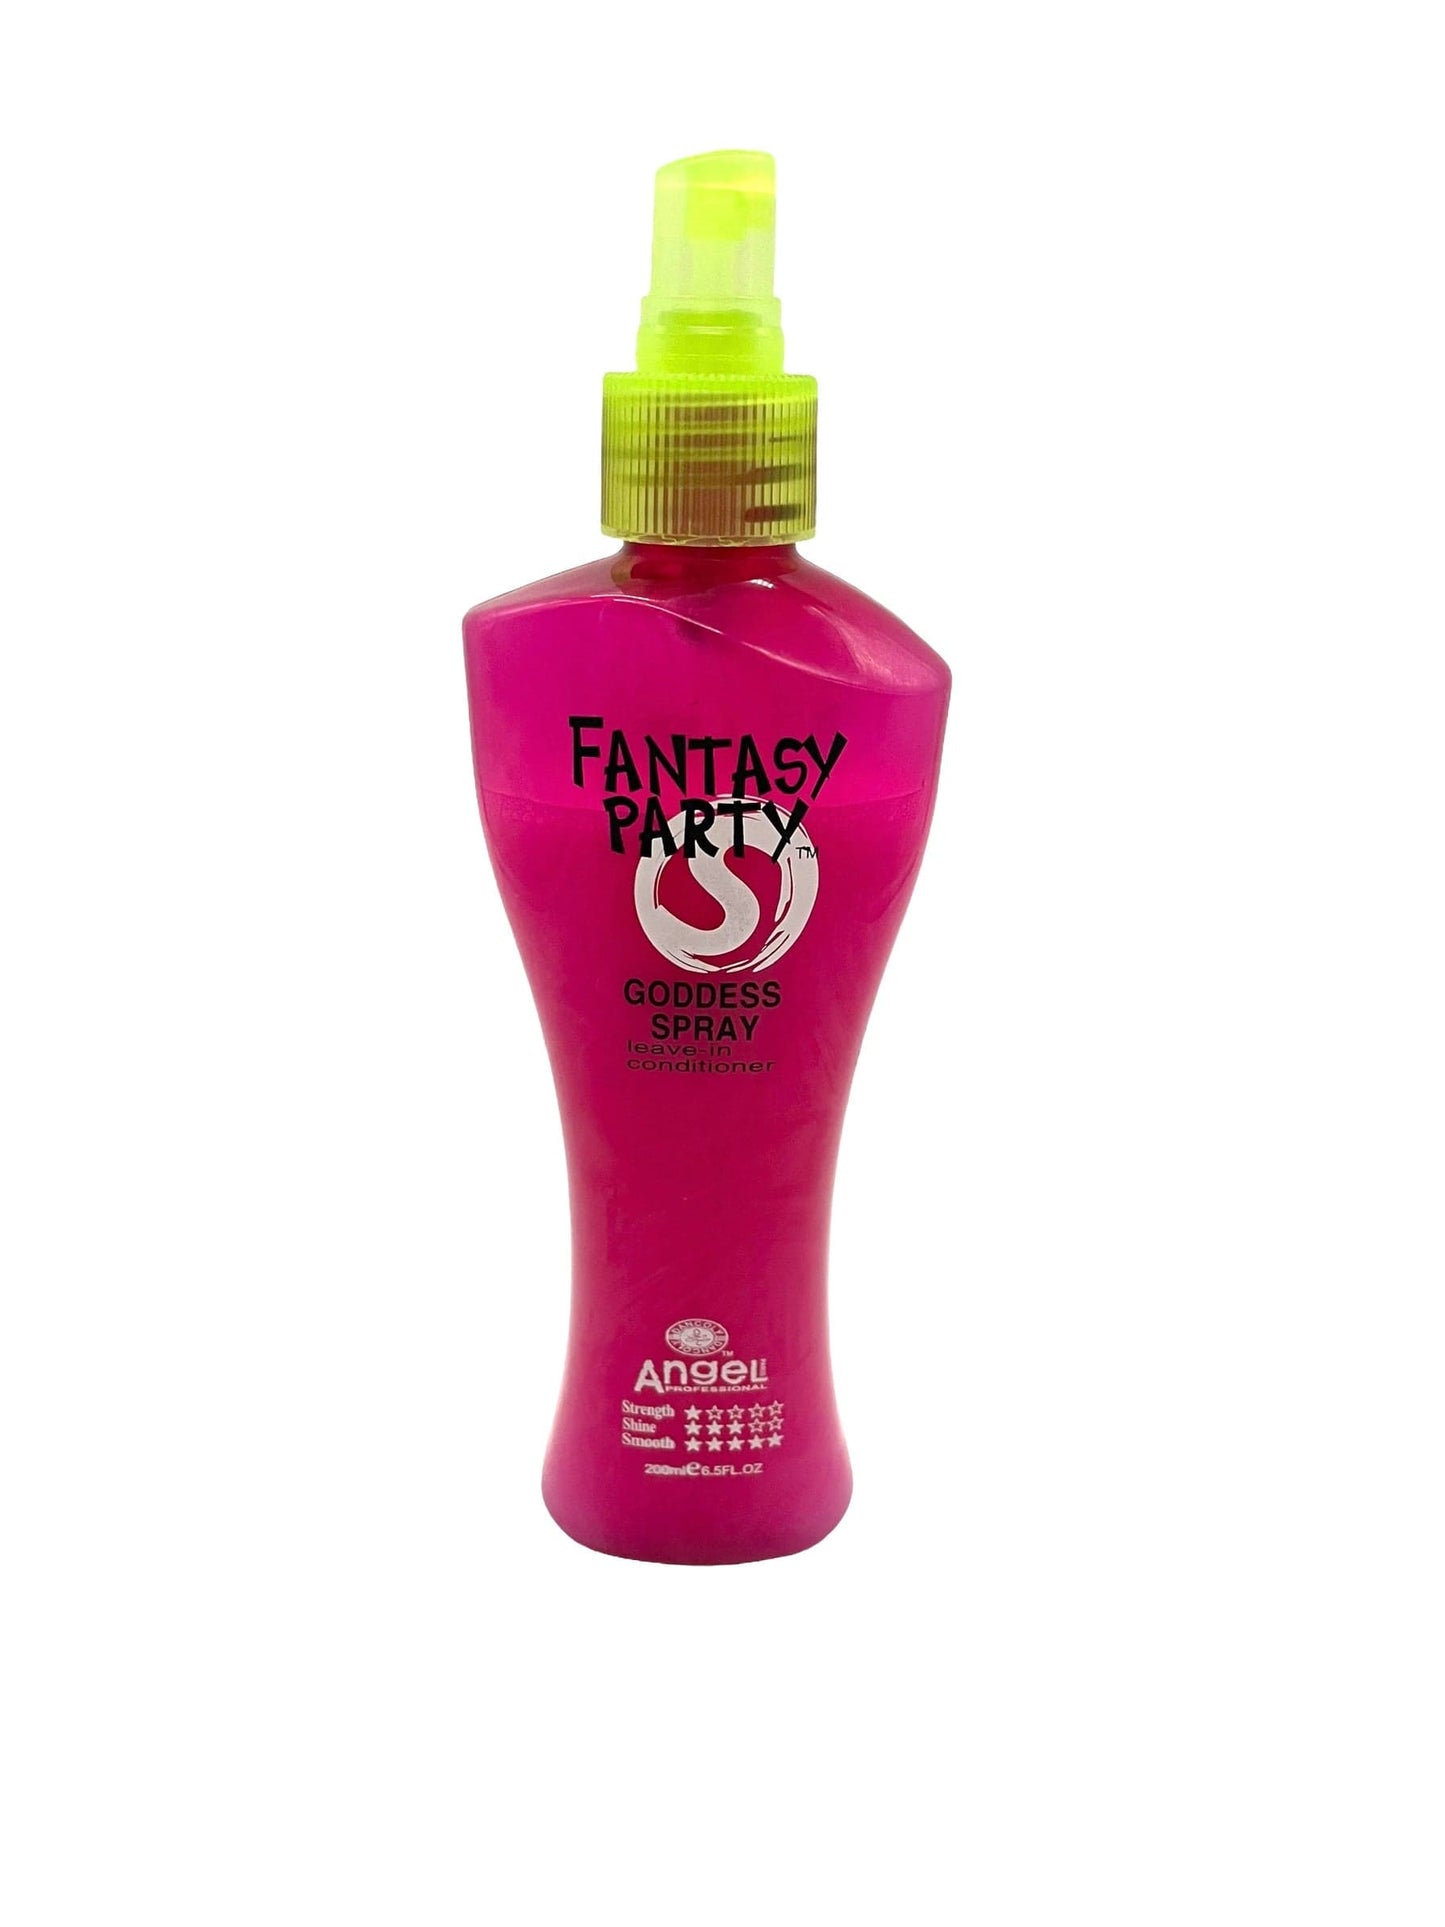 Angel Professional Goddess Spray Leave In Conditioner Fantasy Party 6.5 oz Hair Leave In Conditioner